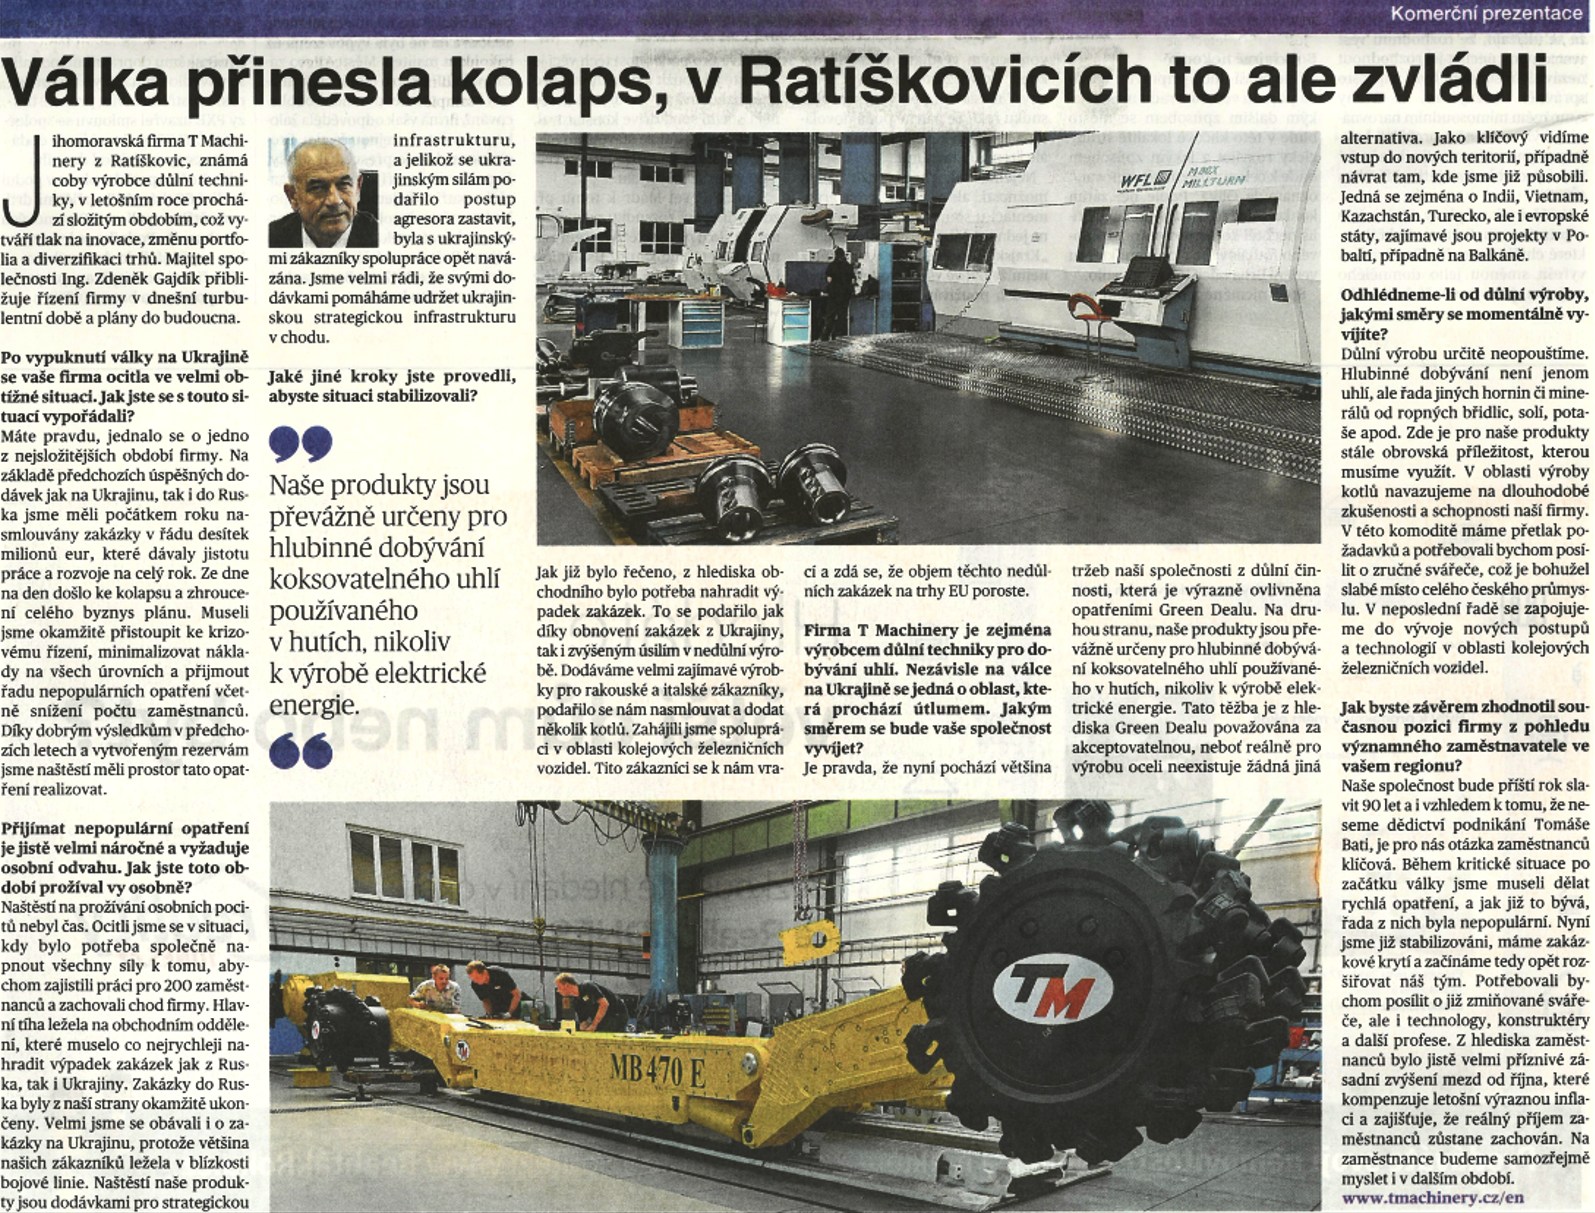 Article in Mladá fronta DNES!